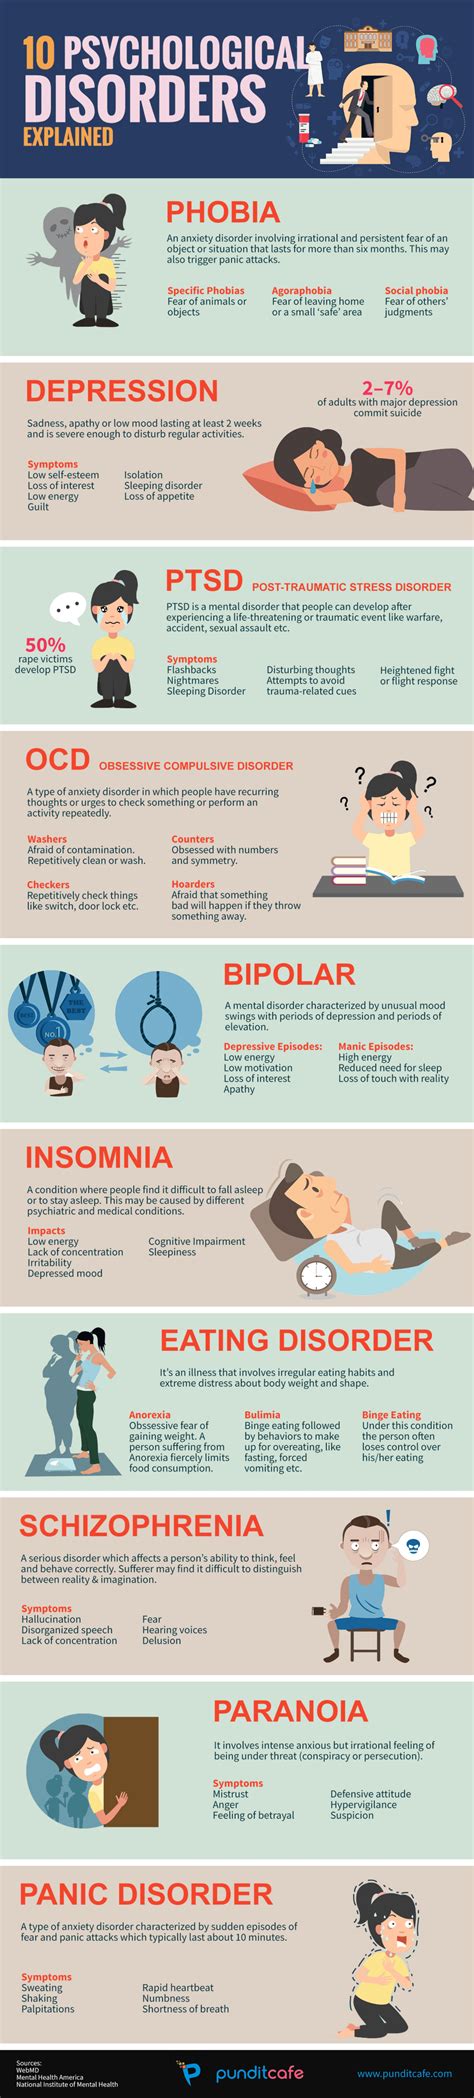 10 Psychological Disorders Explained Infographic Visualistan